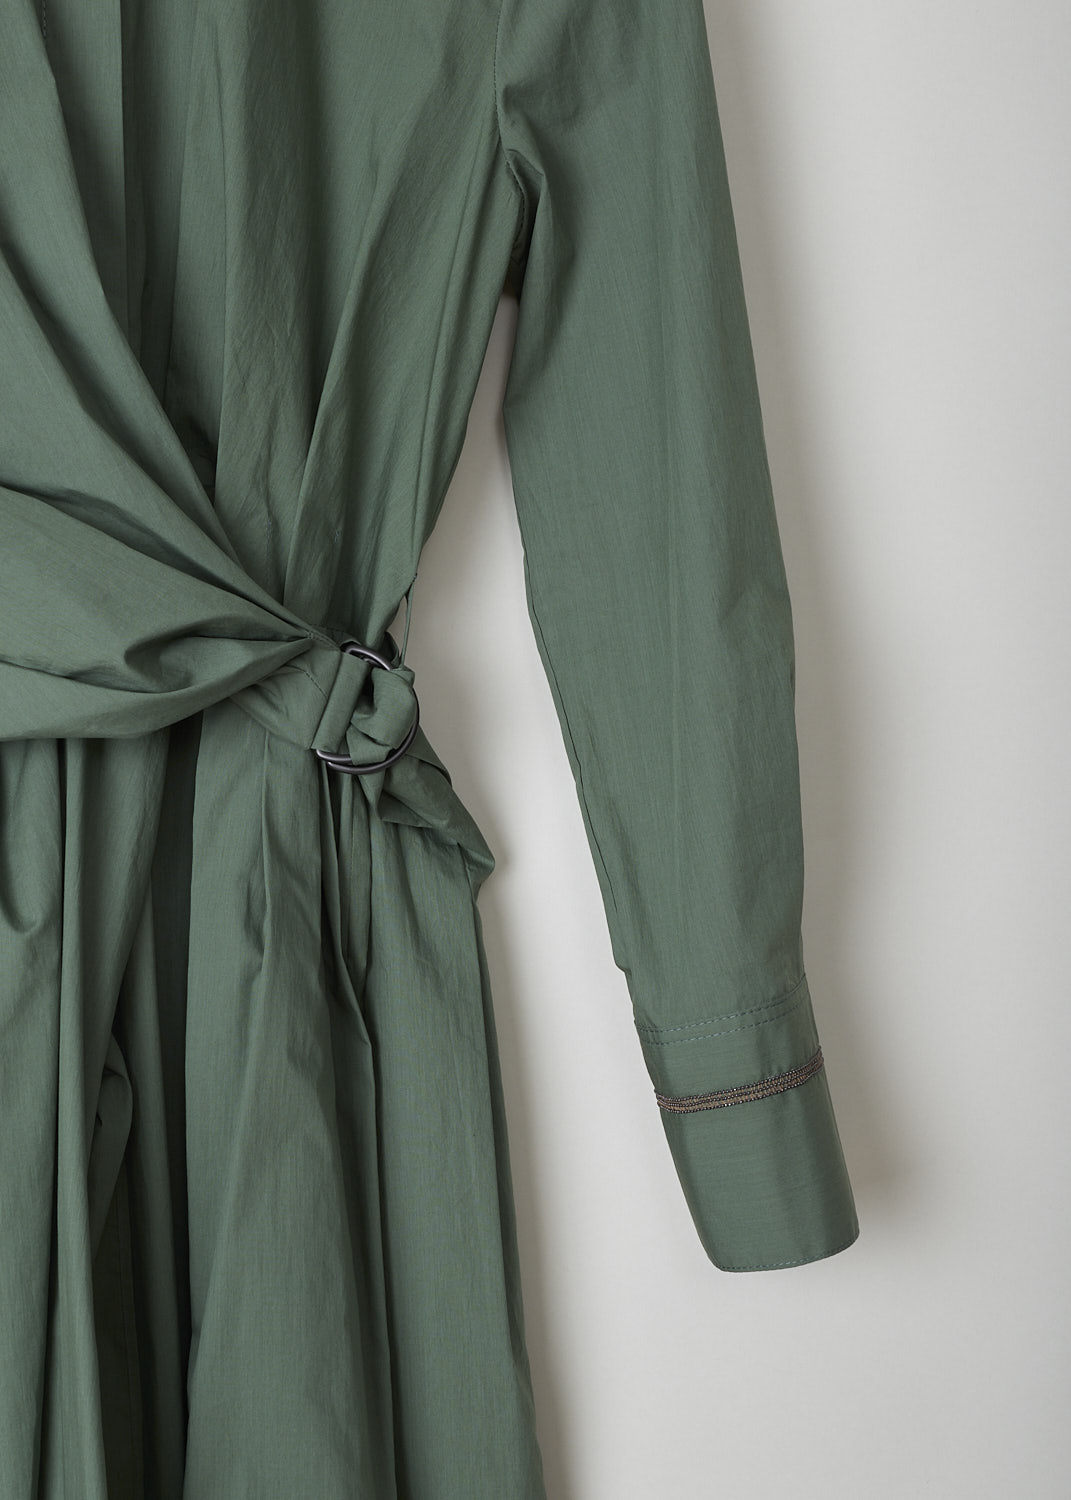 BRUNELLO CUCINELLI, GREEN SHIRT DRESS WITH WRAP DETAIL, M0H93A4873_C8625, Green, Detail 1, This green midi shirt dress has a classic collar and concealed front button closure that goes down to the waistband. The waistband is elasticated at the back. The waist is accentuated by the wrap detail, that goes around like a belt and is fastened to one side with the metal buckle. The long sleeves have buttoned cuffs and are decorated with a monili beaded trim.
